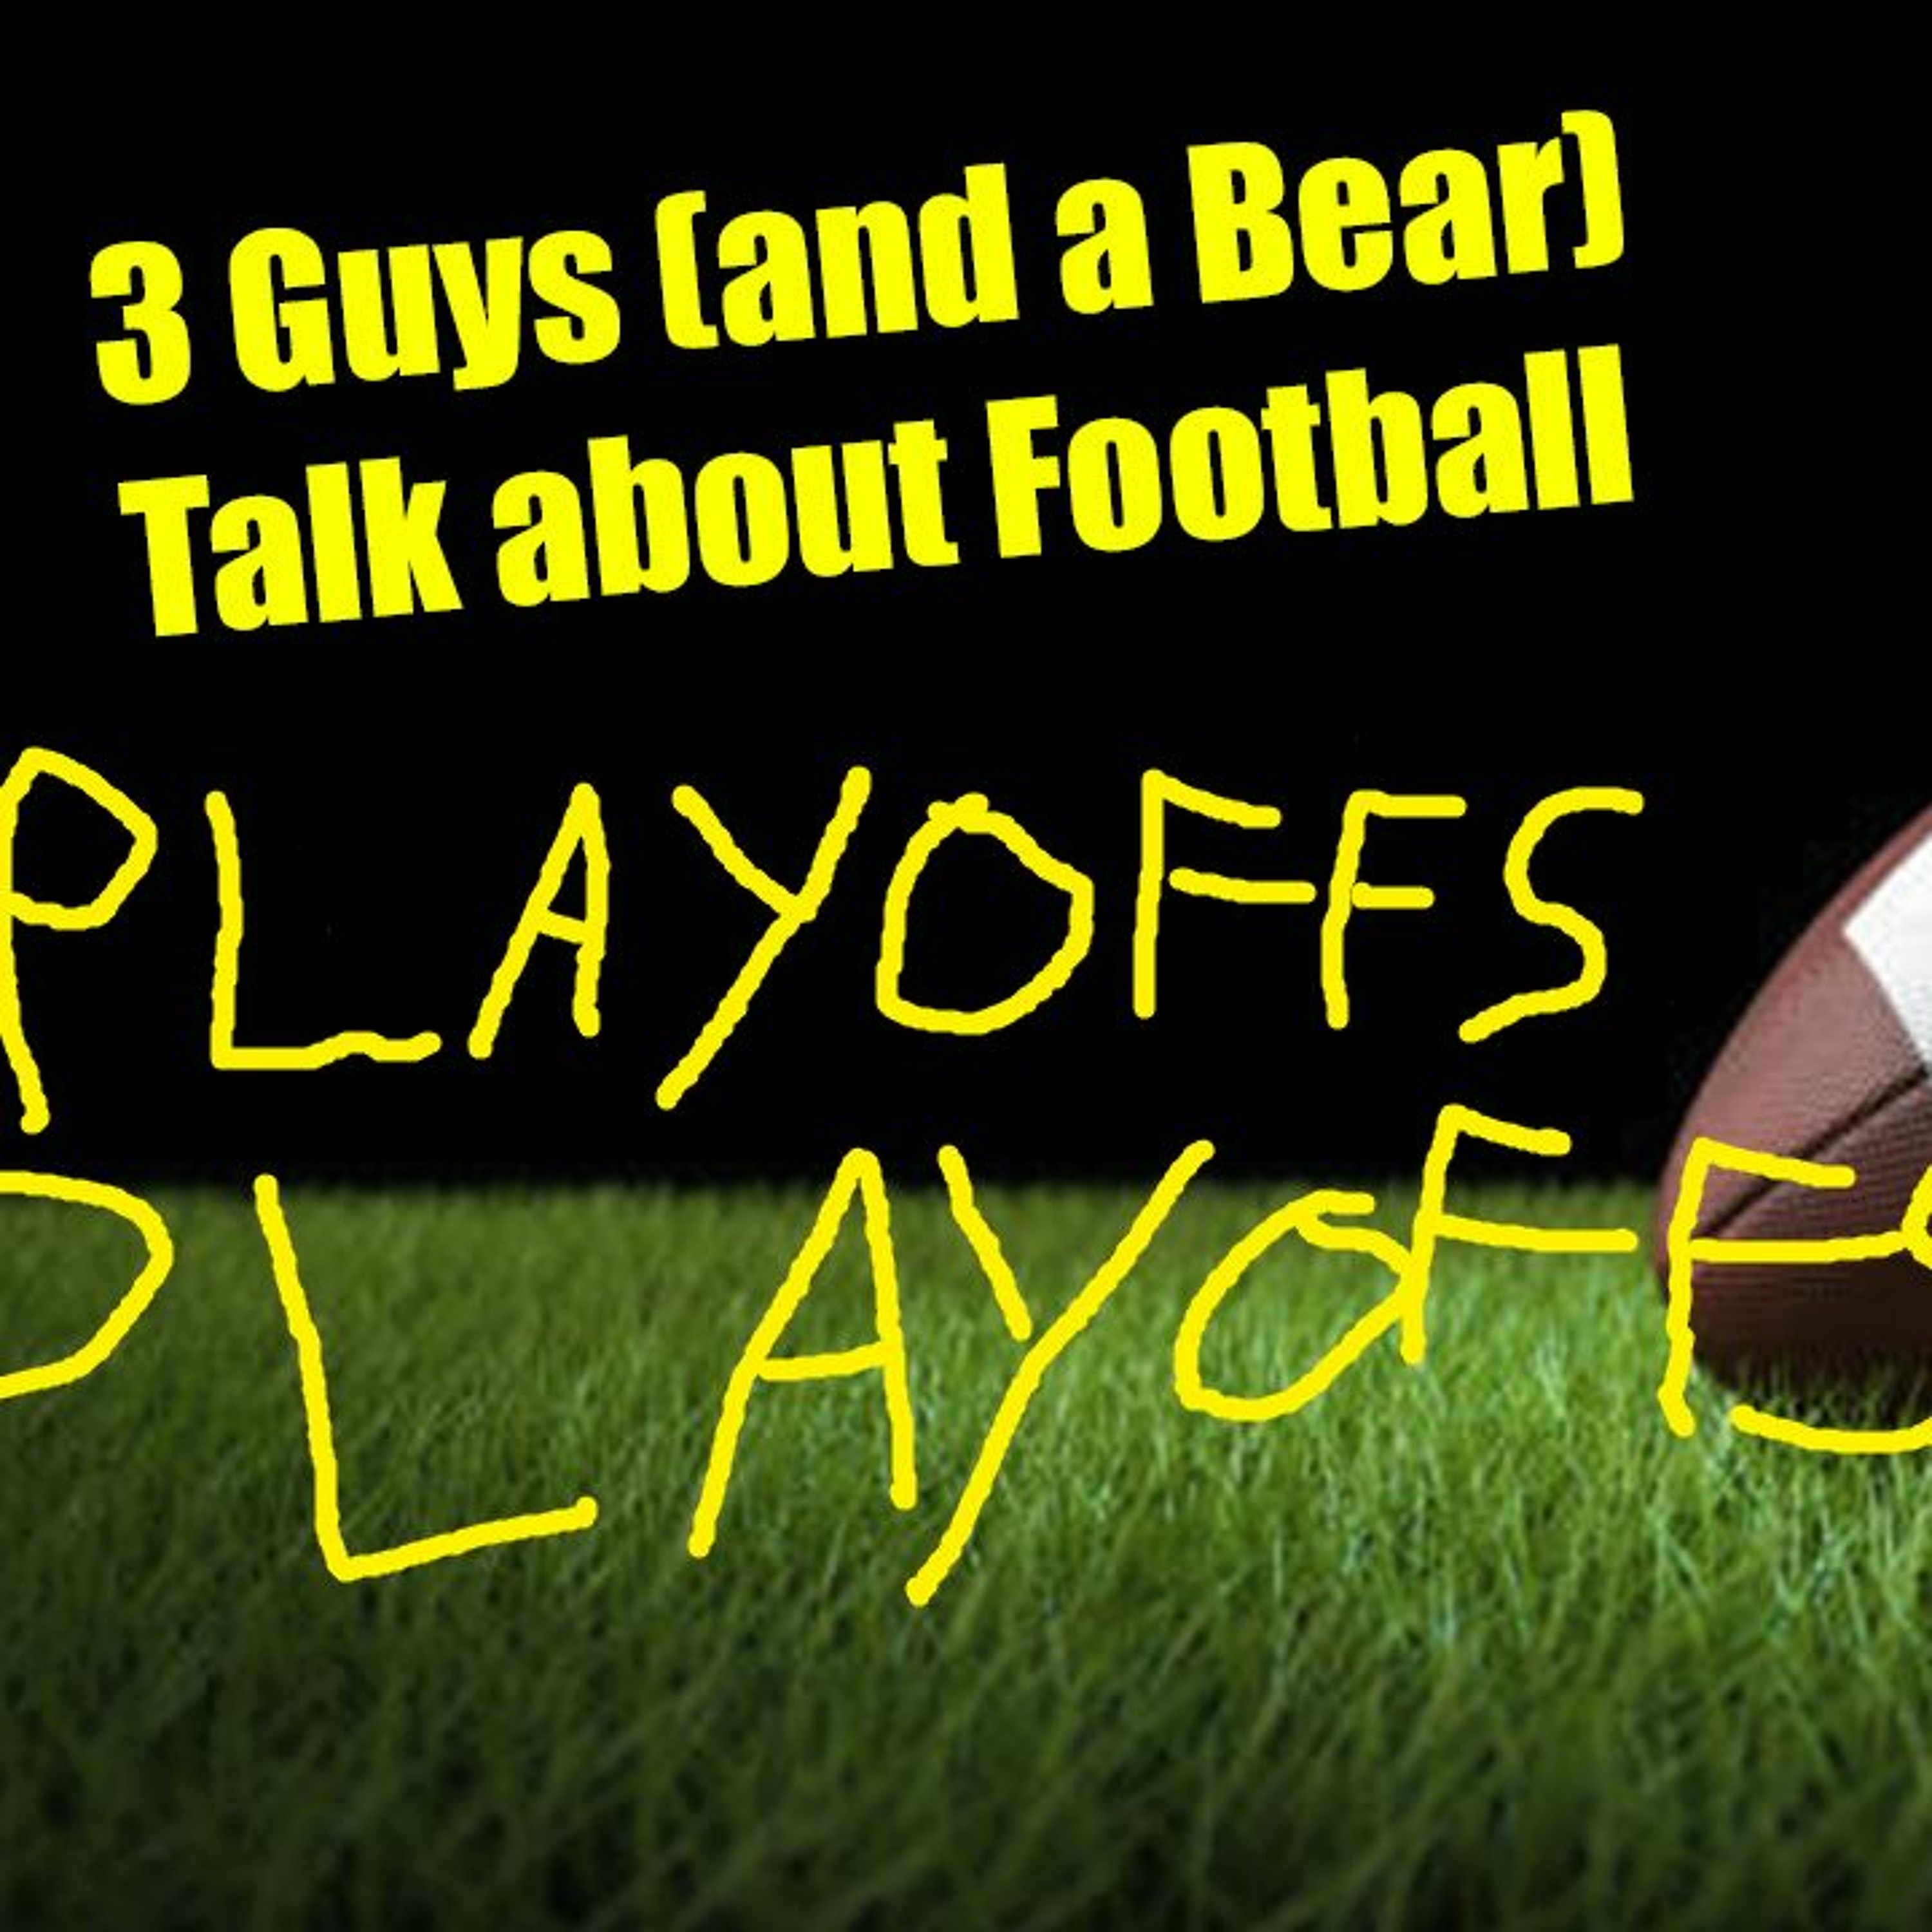 Three Guys (And a Bear) Talk About Football - 2023-2024 NFL Divisional PLAYOFFS?!?!